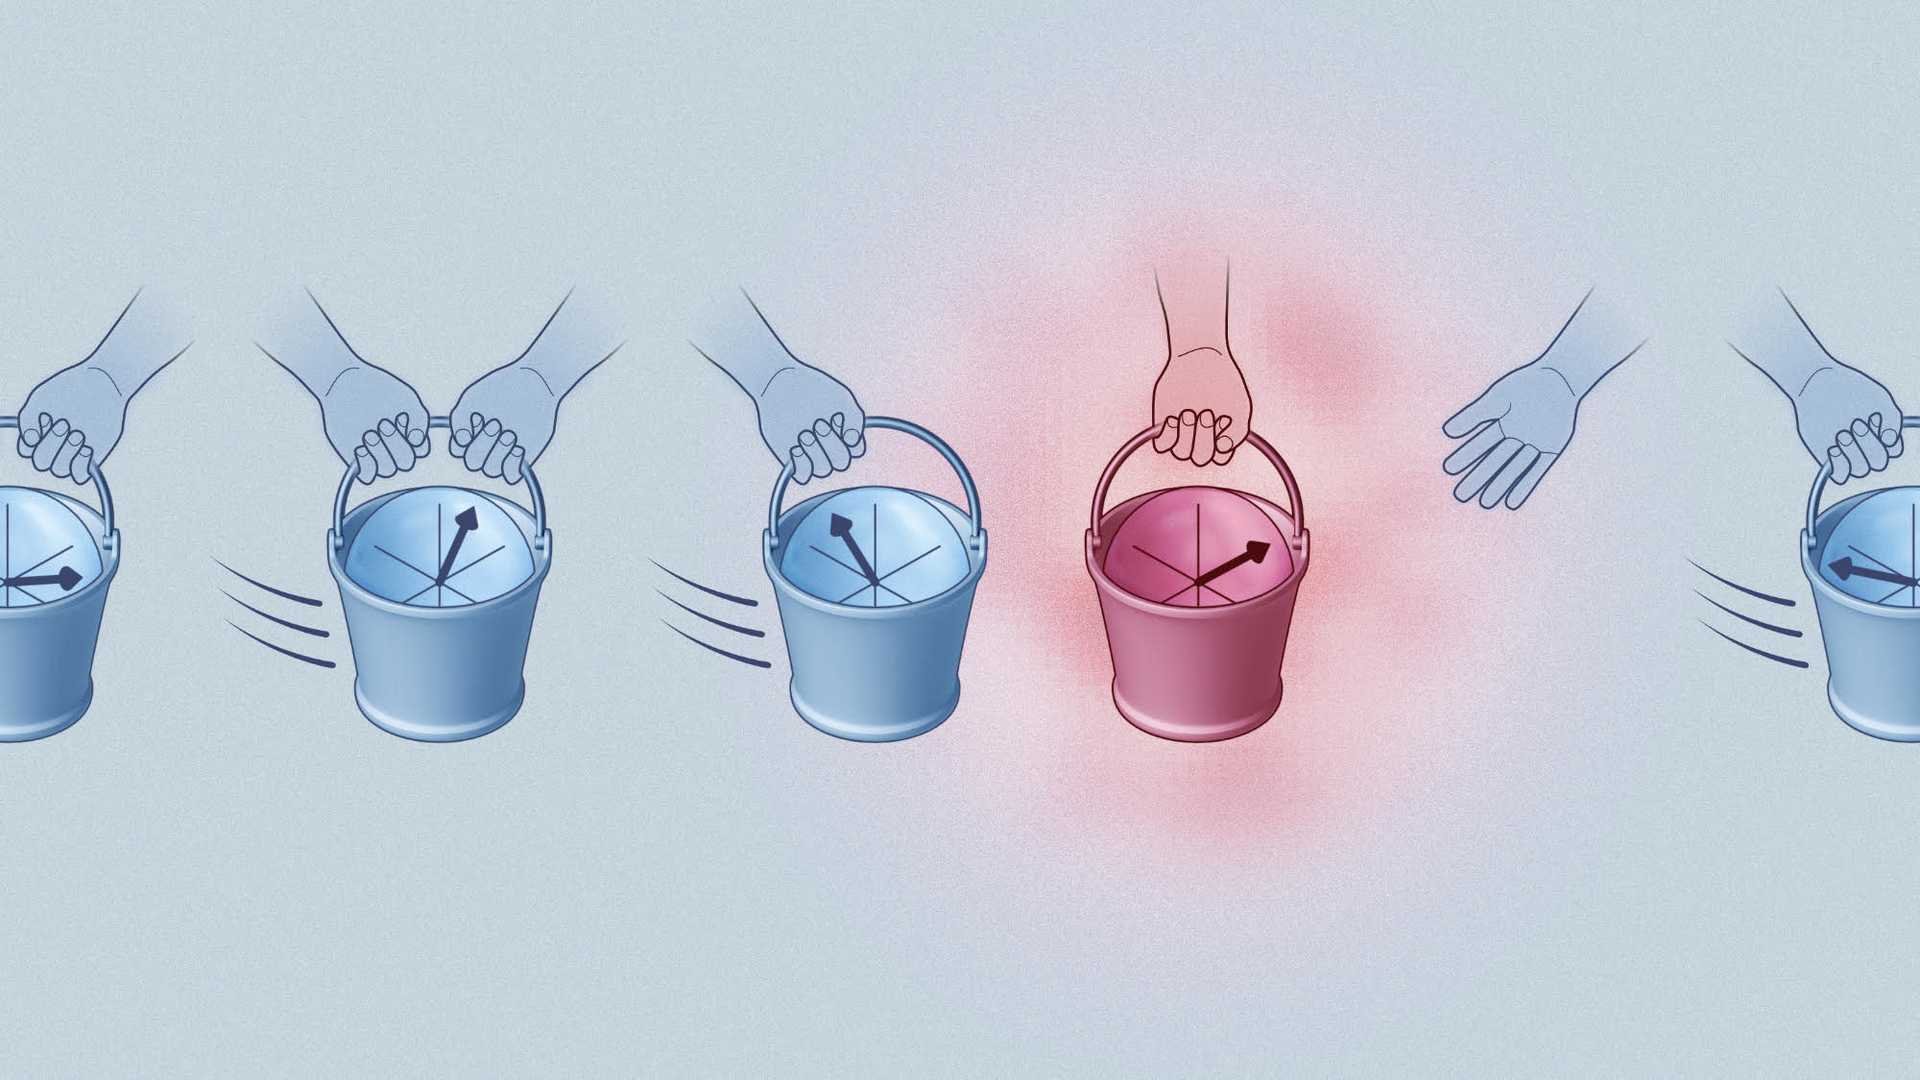 Hands pass buckets to the left containing spheres and arrows representing quantum states. Most are blue but one is red and is failing to move the bucket.